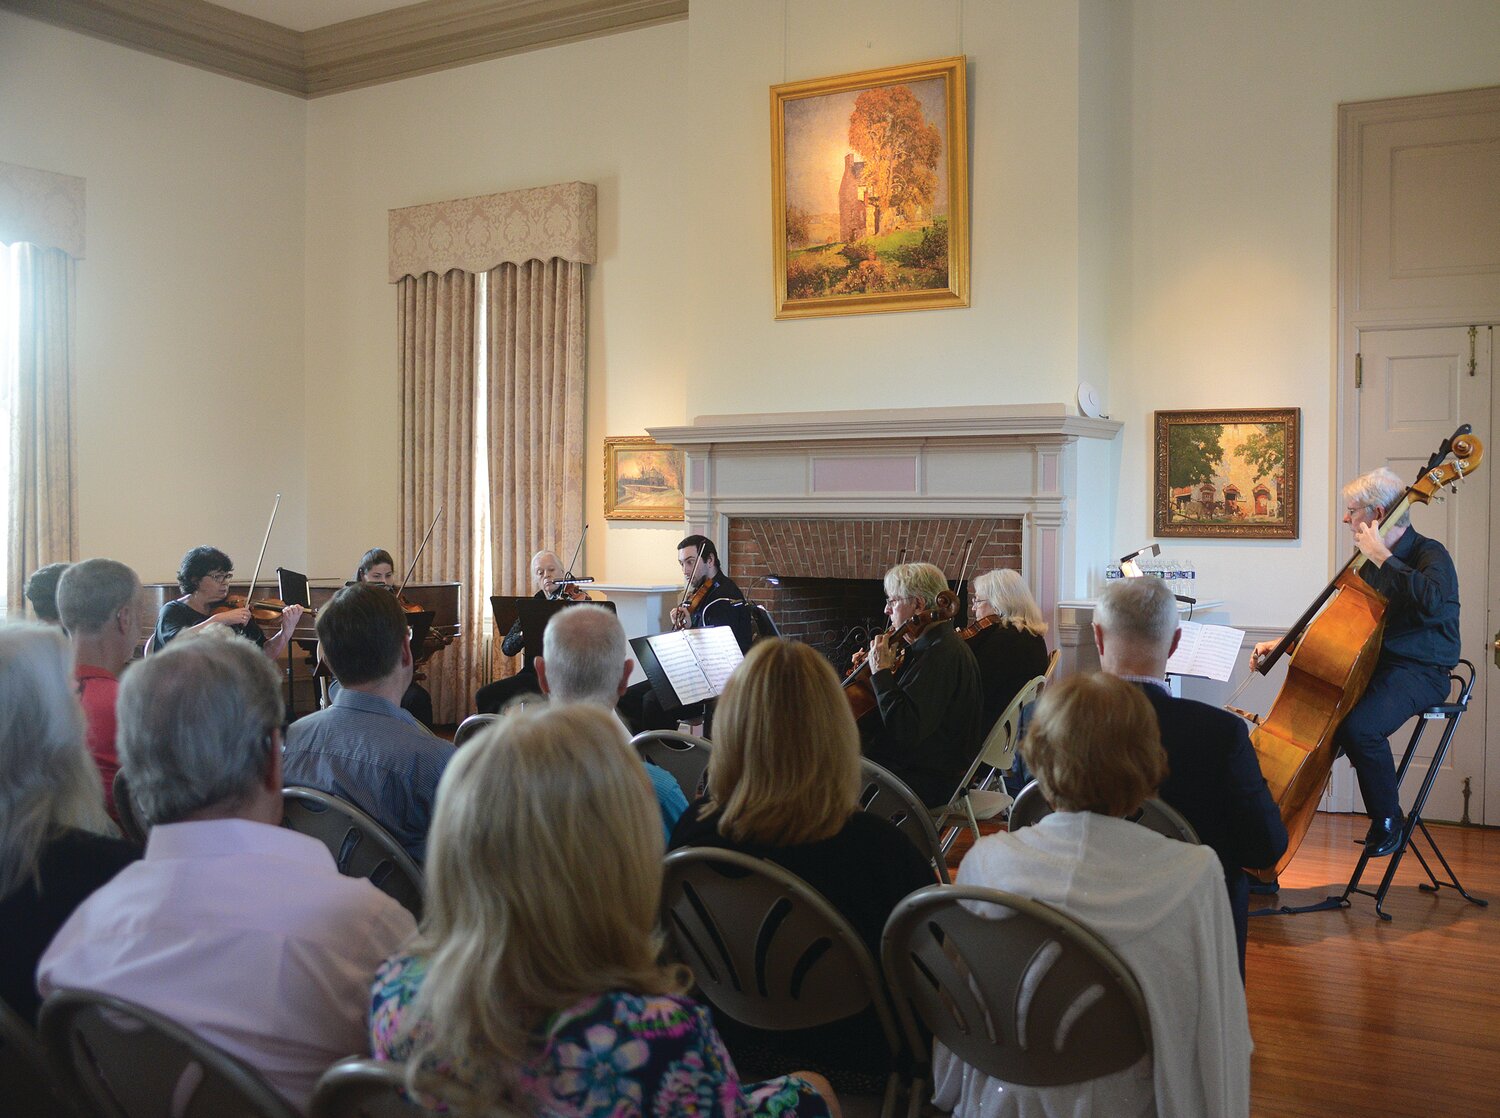 Chamber musicians from the Bucks County Symphony Orchestra perform for guests at the Mercer Museum.